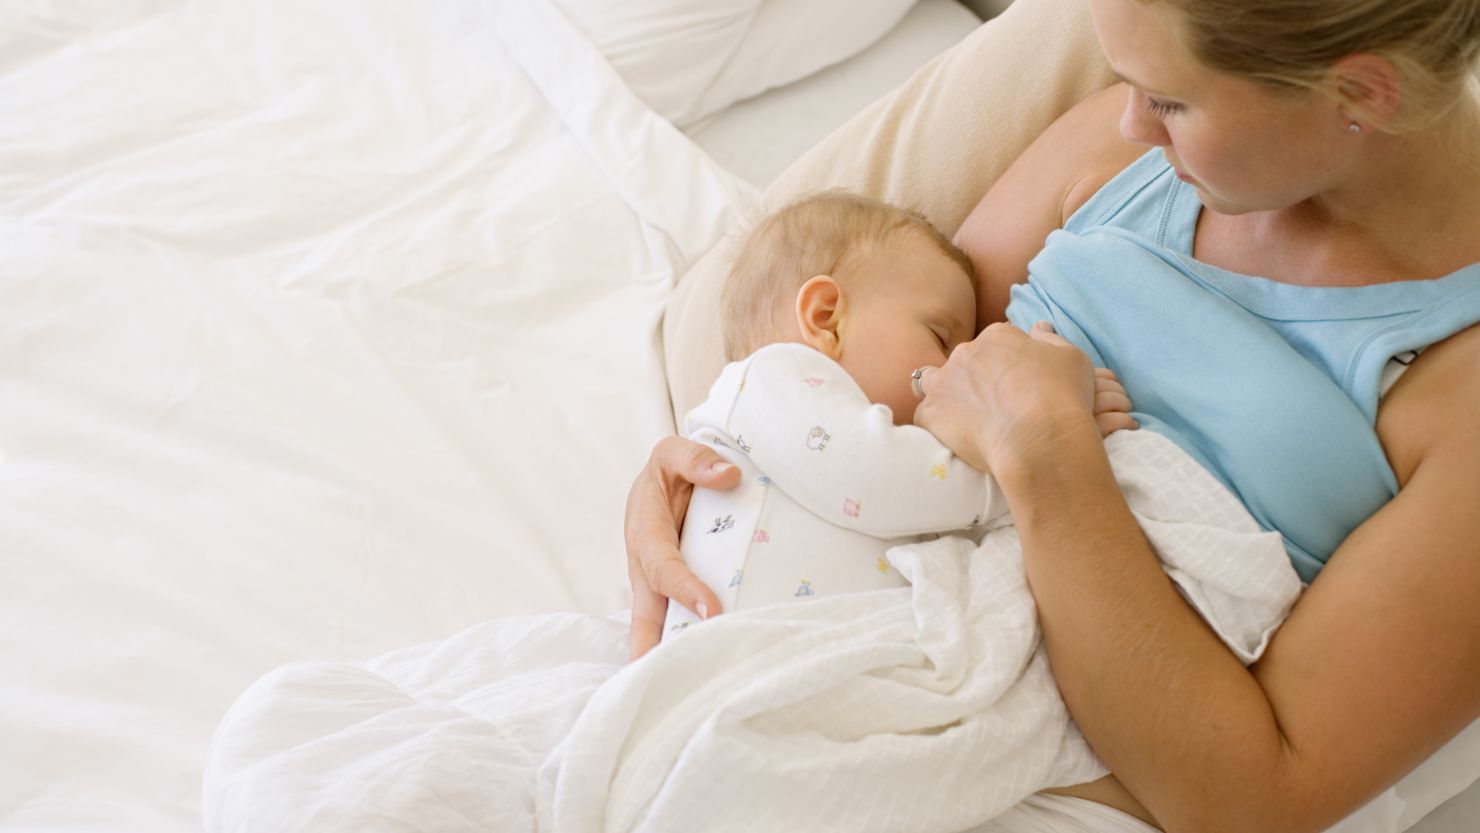 Project Breastfeeding campaign shows dads' support for nursing